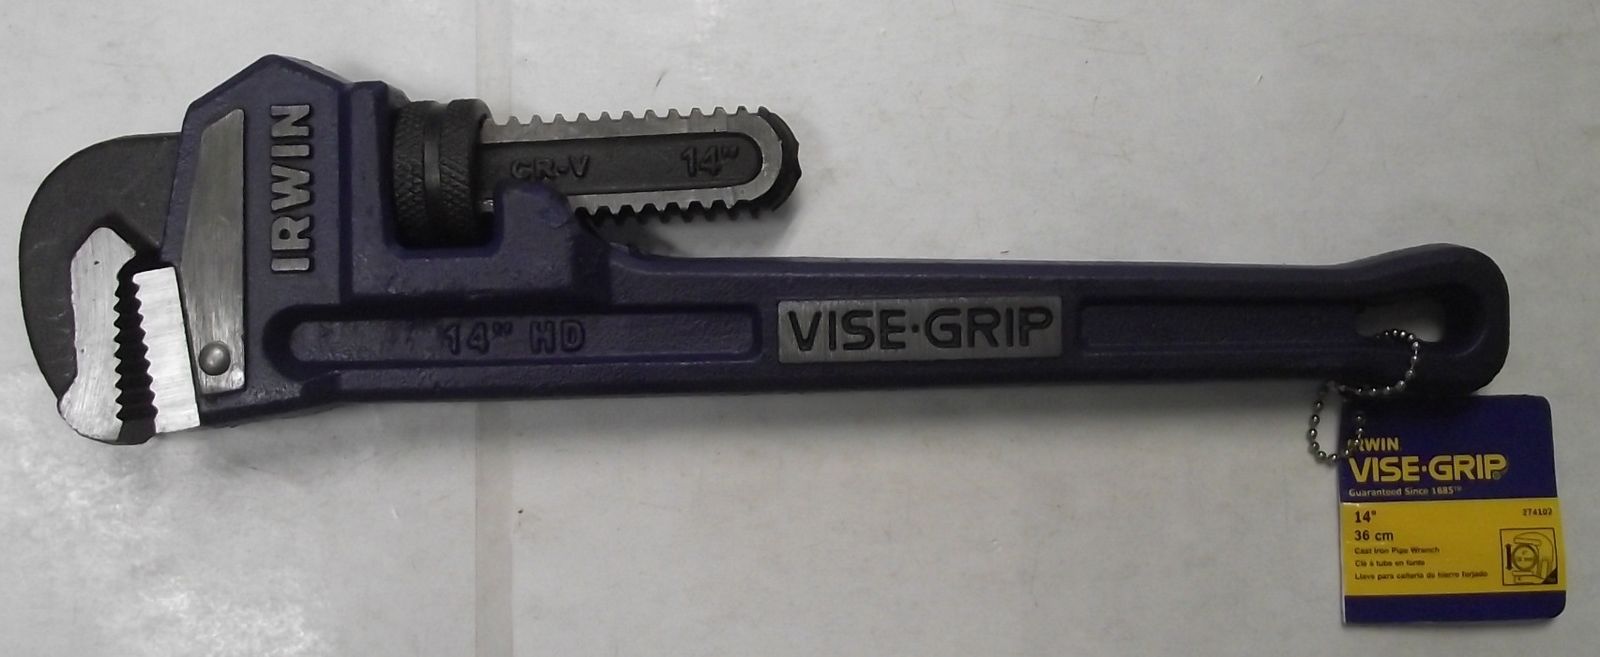 Irwin VISE-GRIP 274102 14" Cast Iron Pipe Wrench